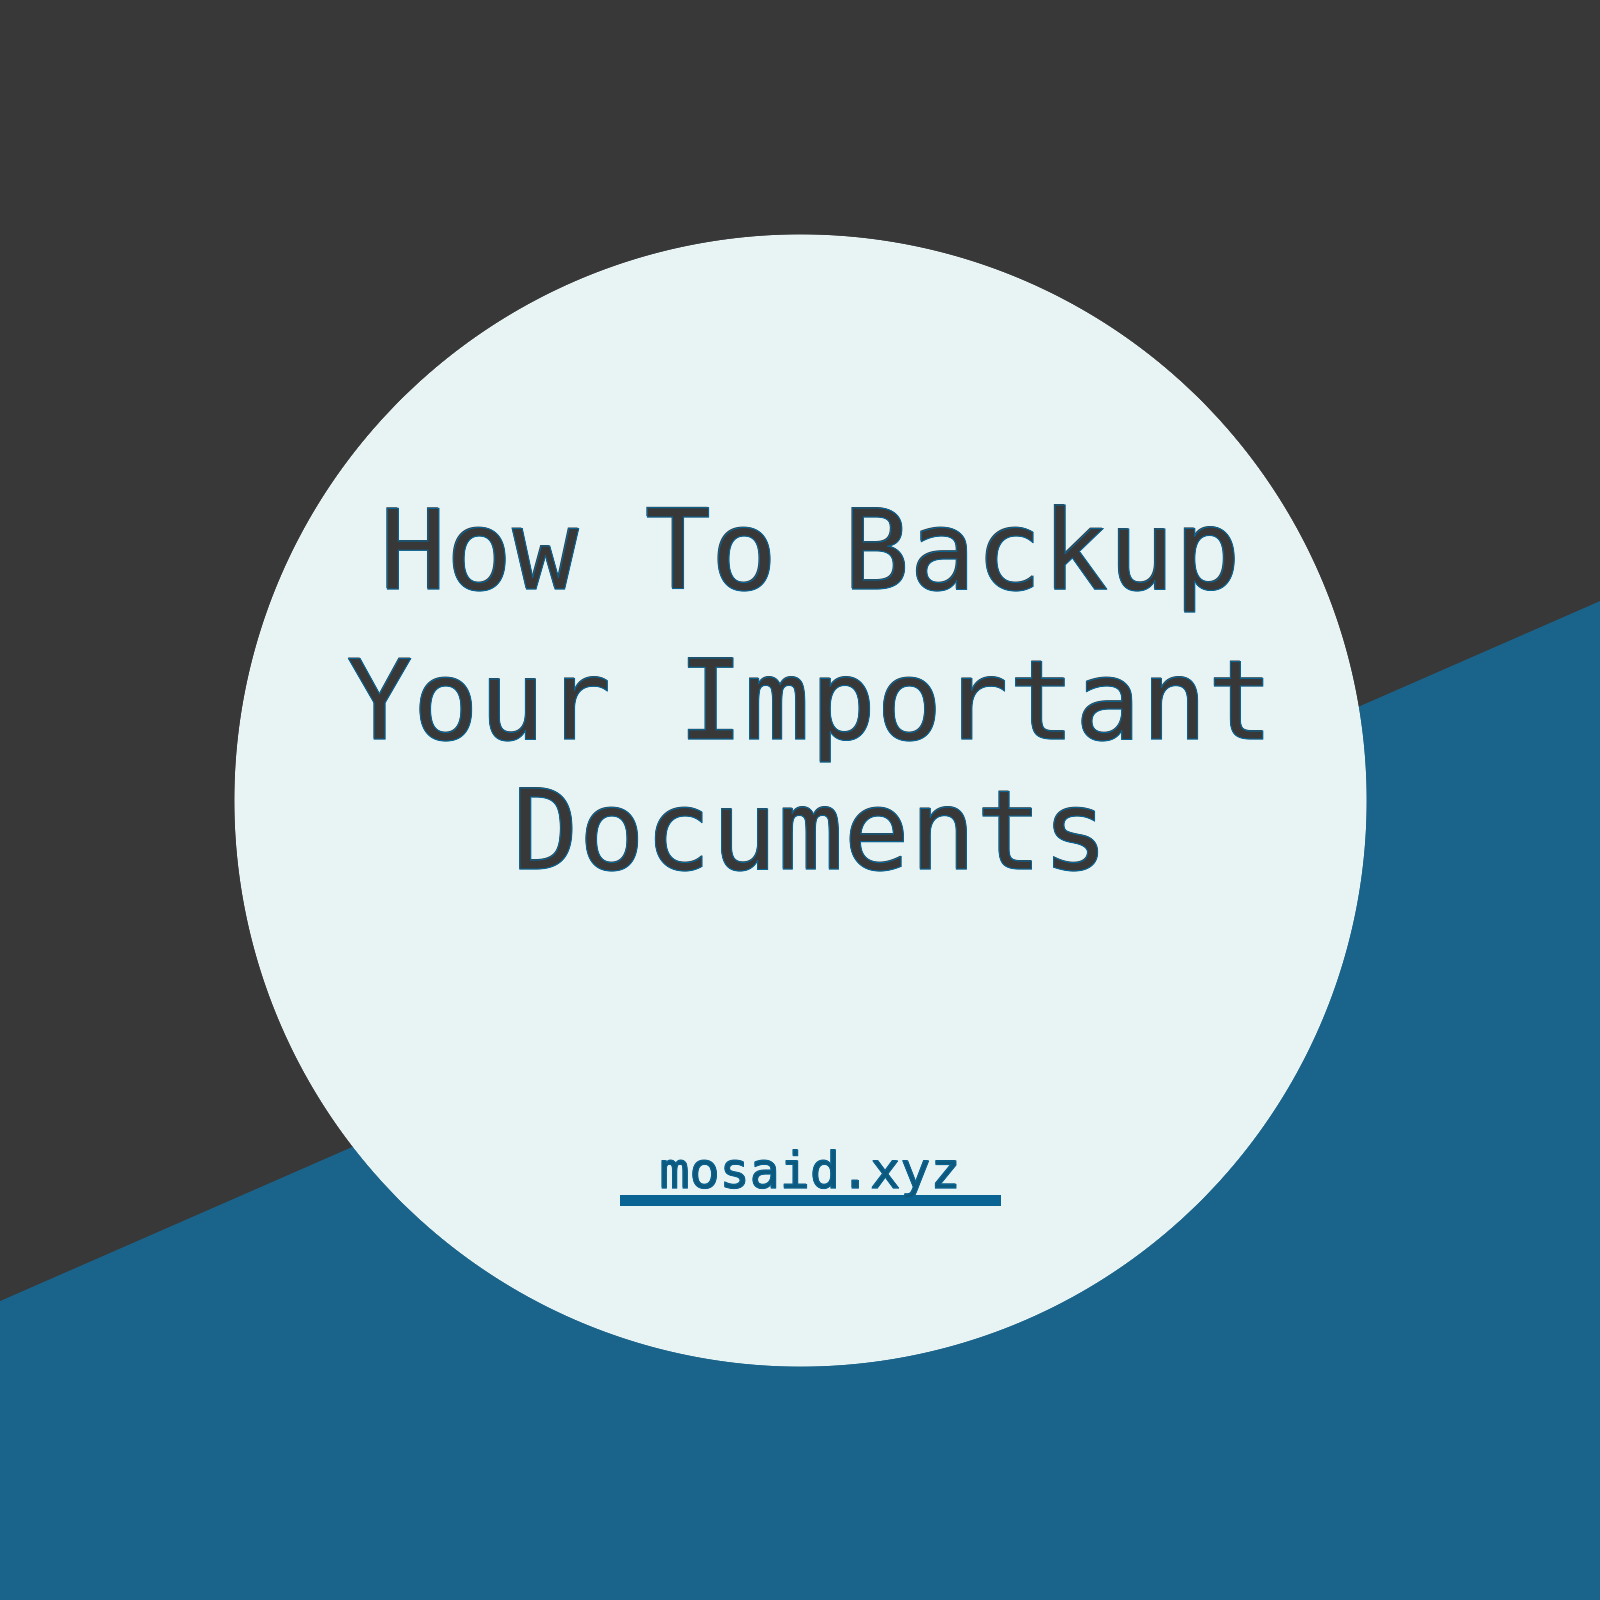 Secure Your Work: Effective Backup Methods for Daily Documents